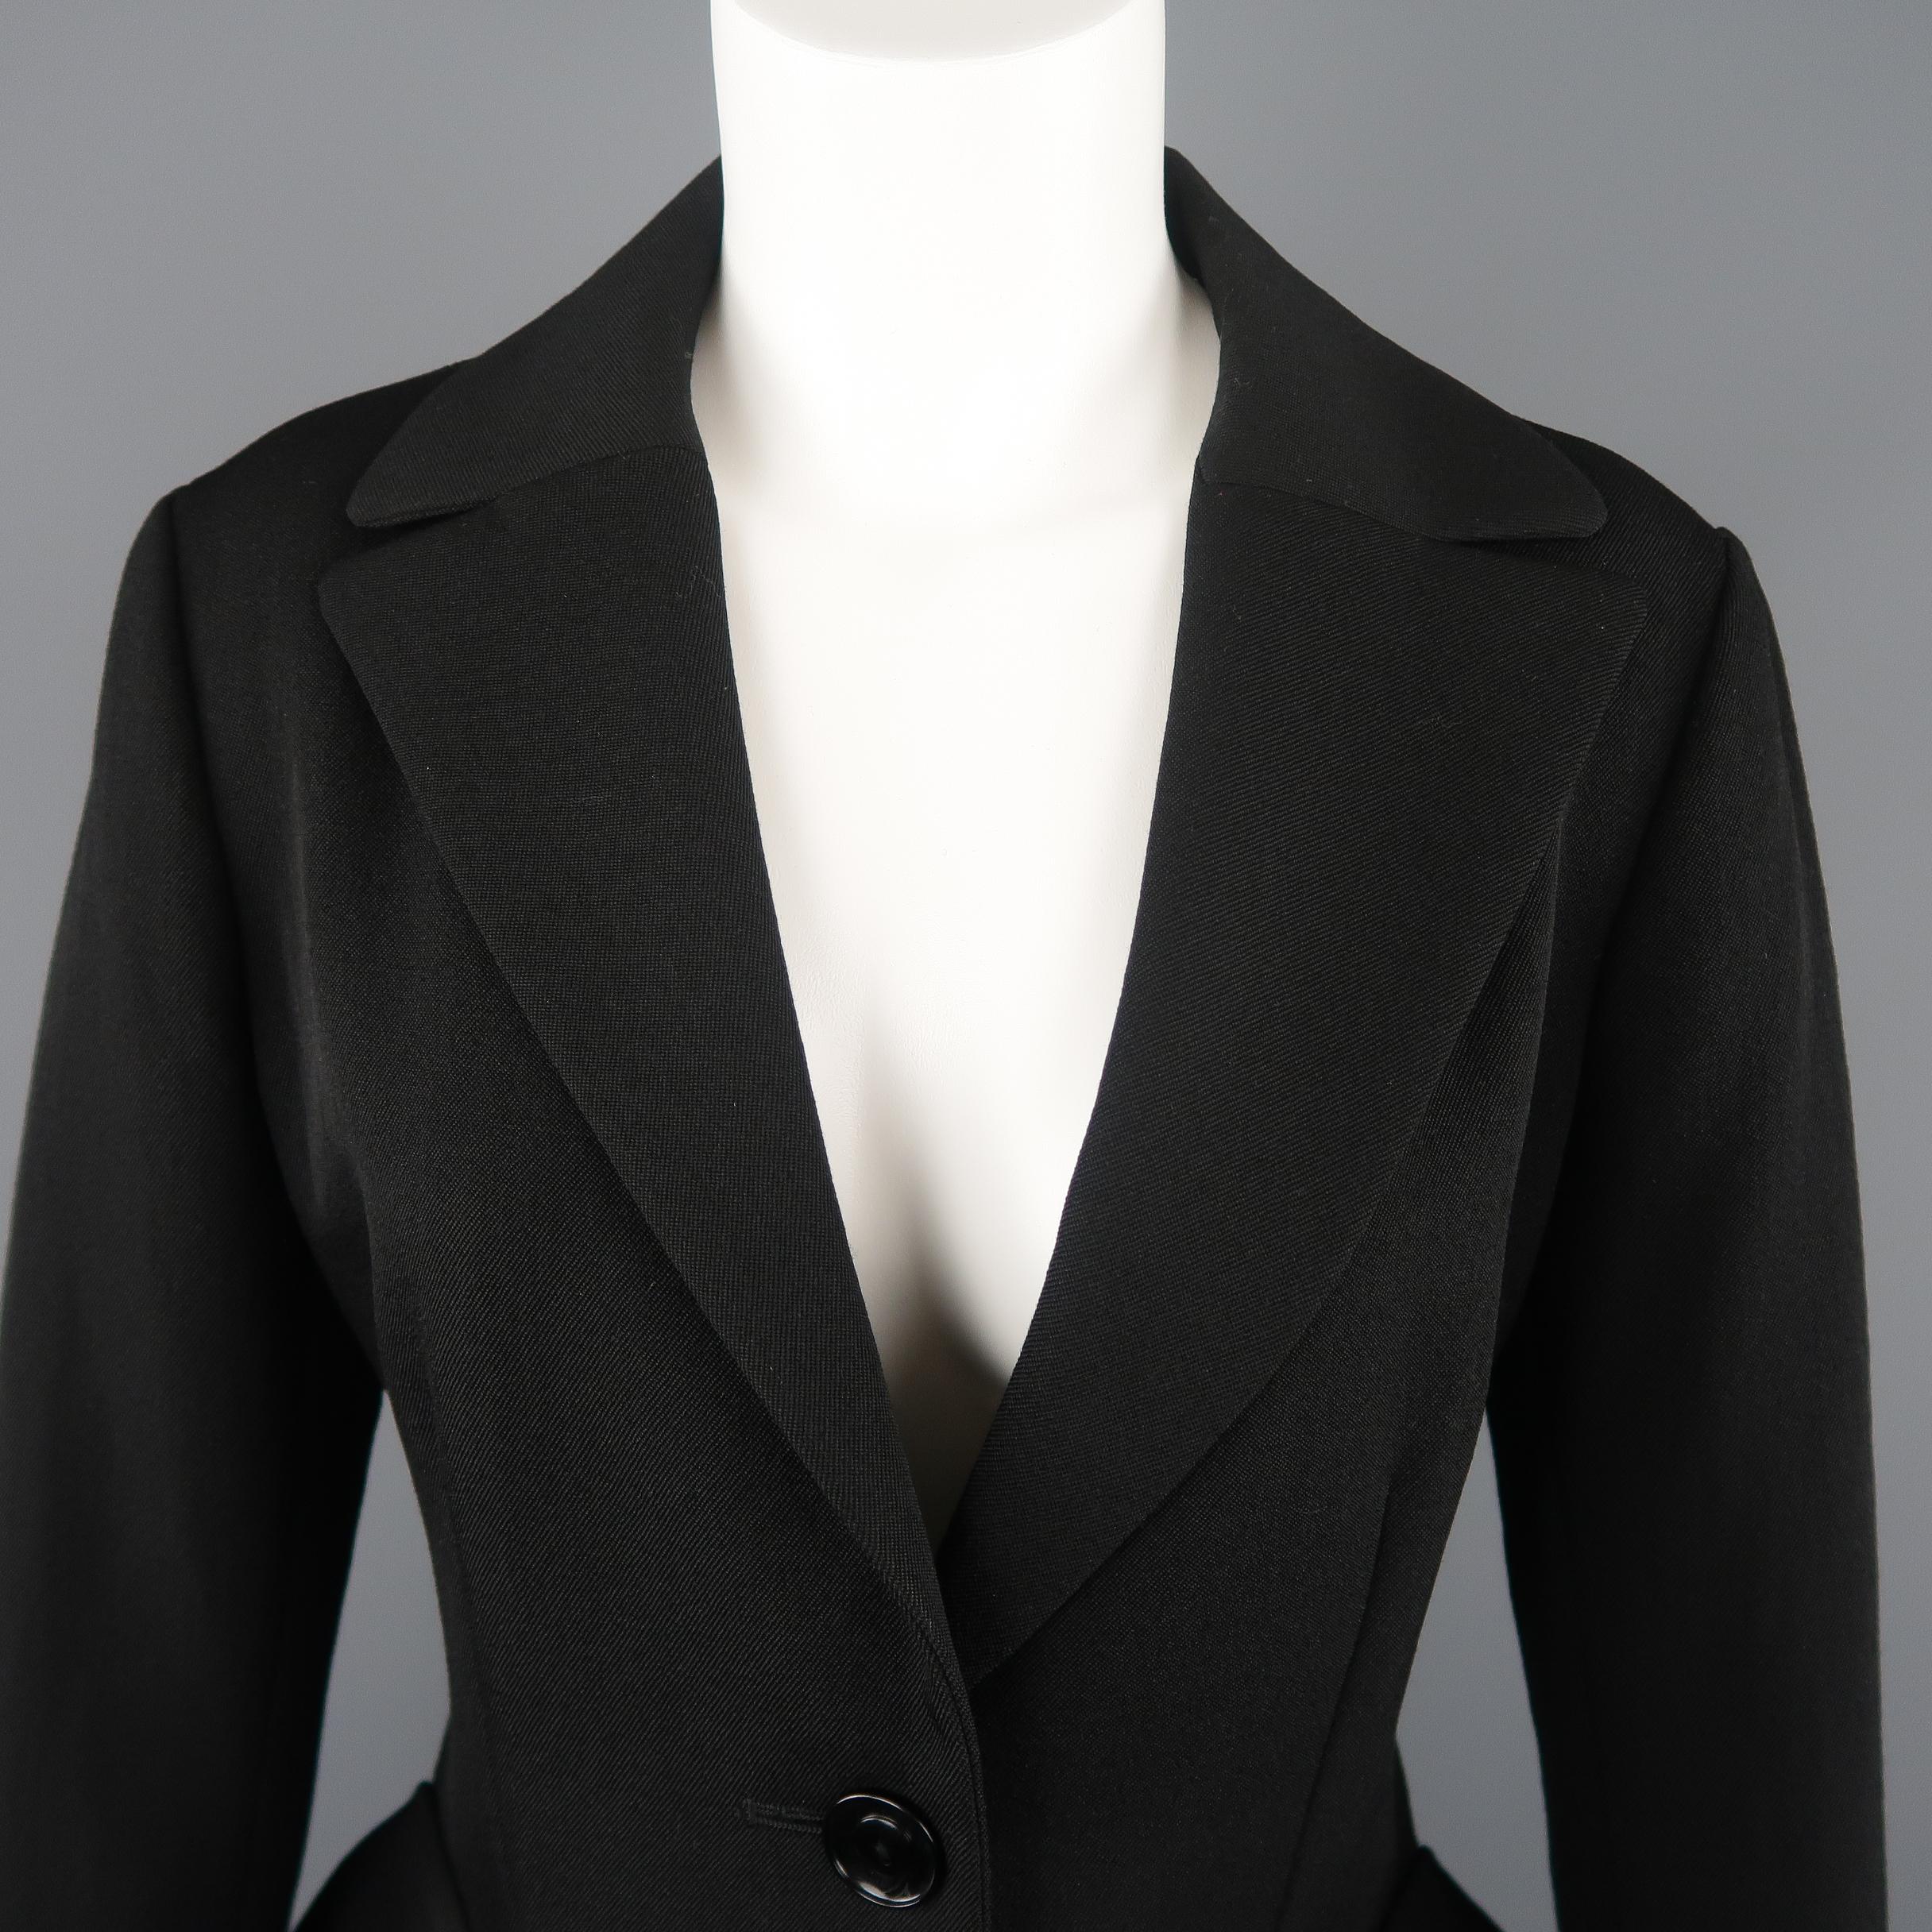 YOHJI YAMAMOTO blazer jacket comes in black wool twill with a pointed lapel, three button single breasted front, and oversized flap patch military style pockets that zip off. Circa 2004. Made in Japan. On display at Victoria and Albert Museum.
